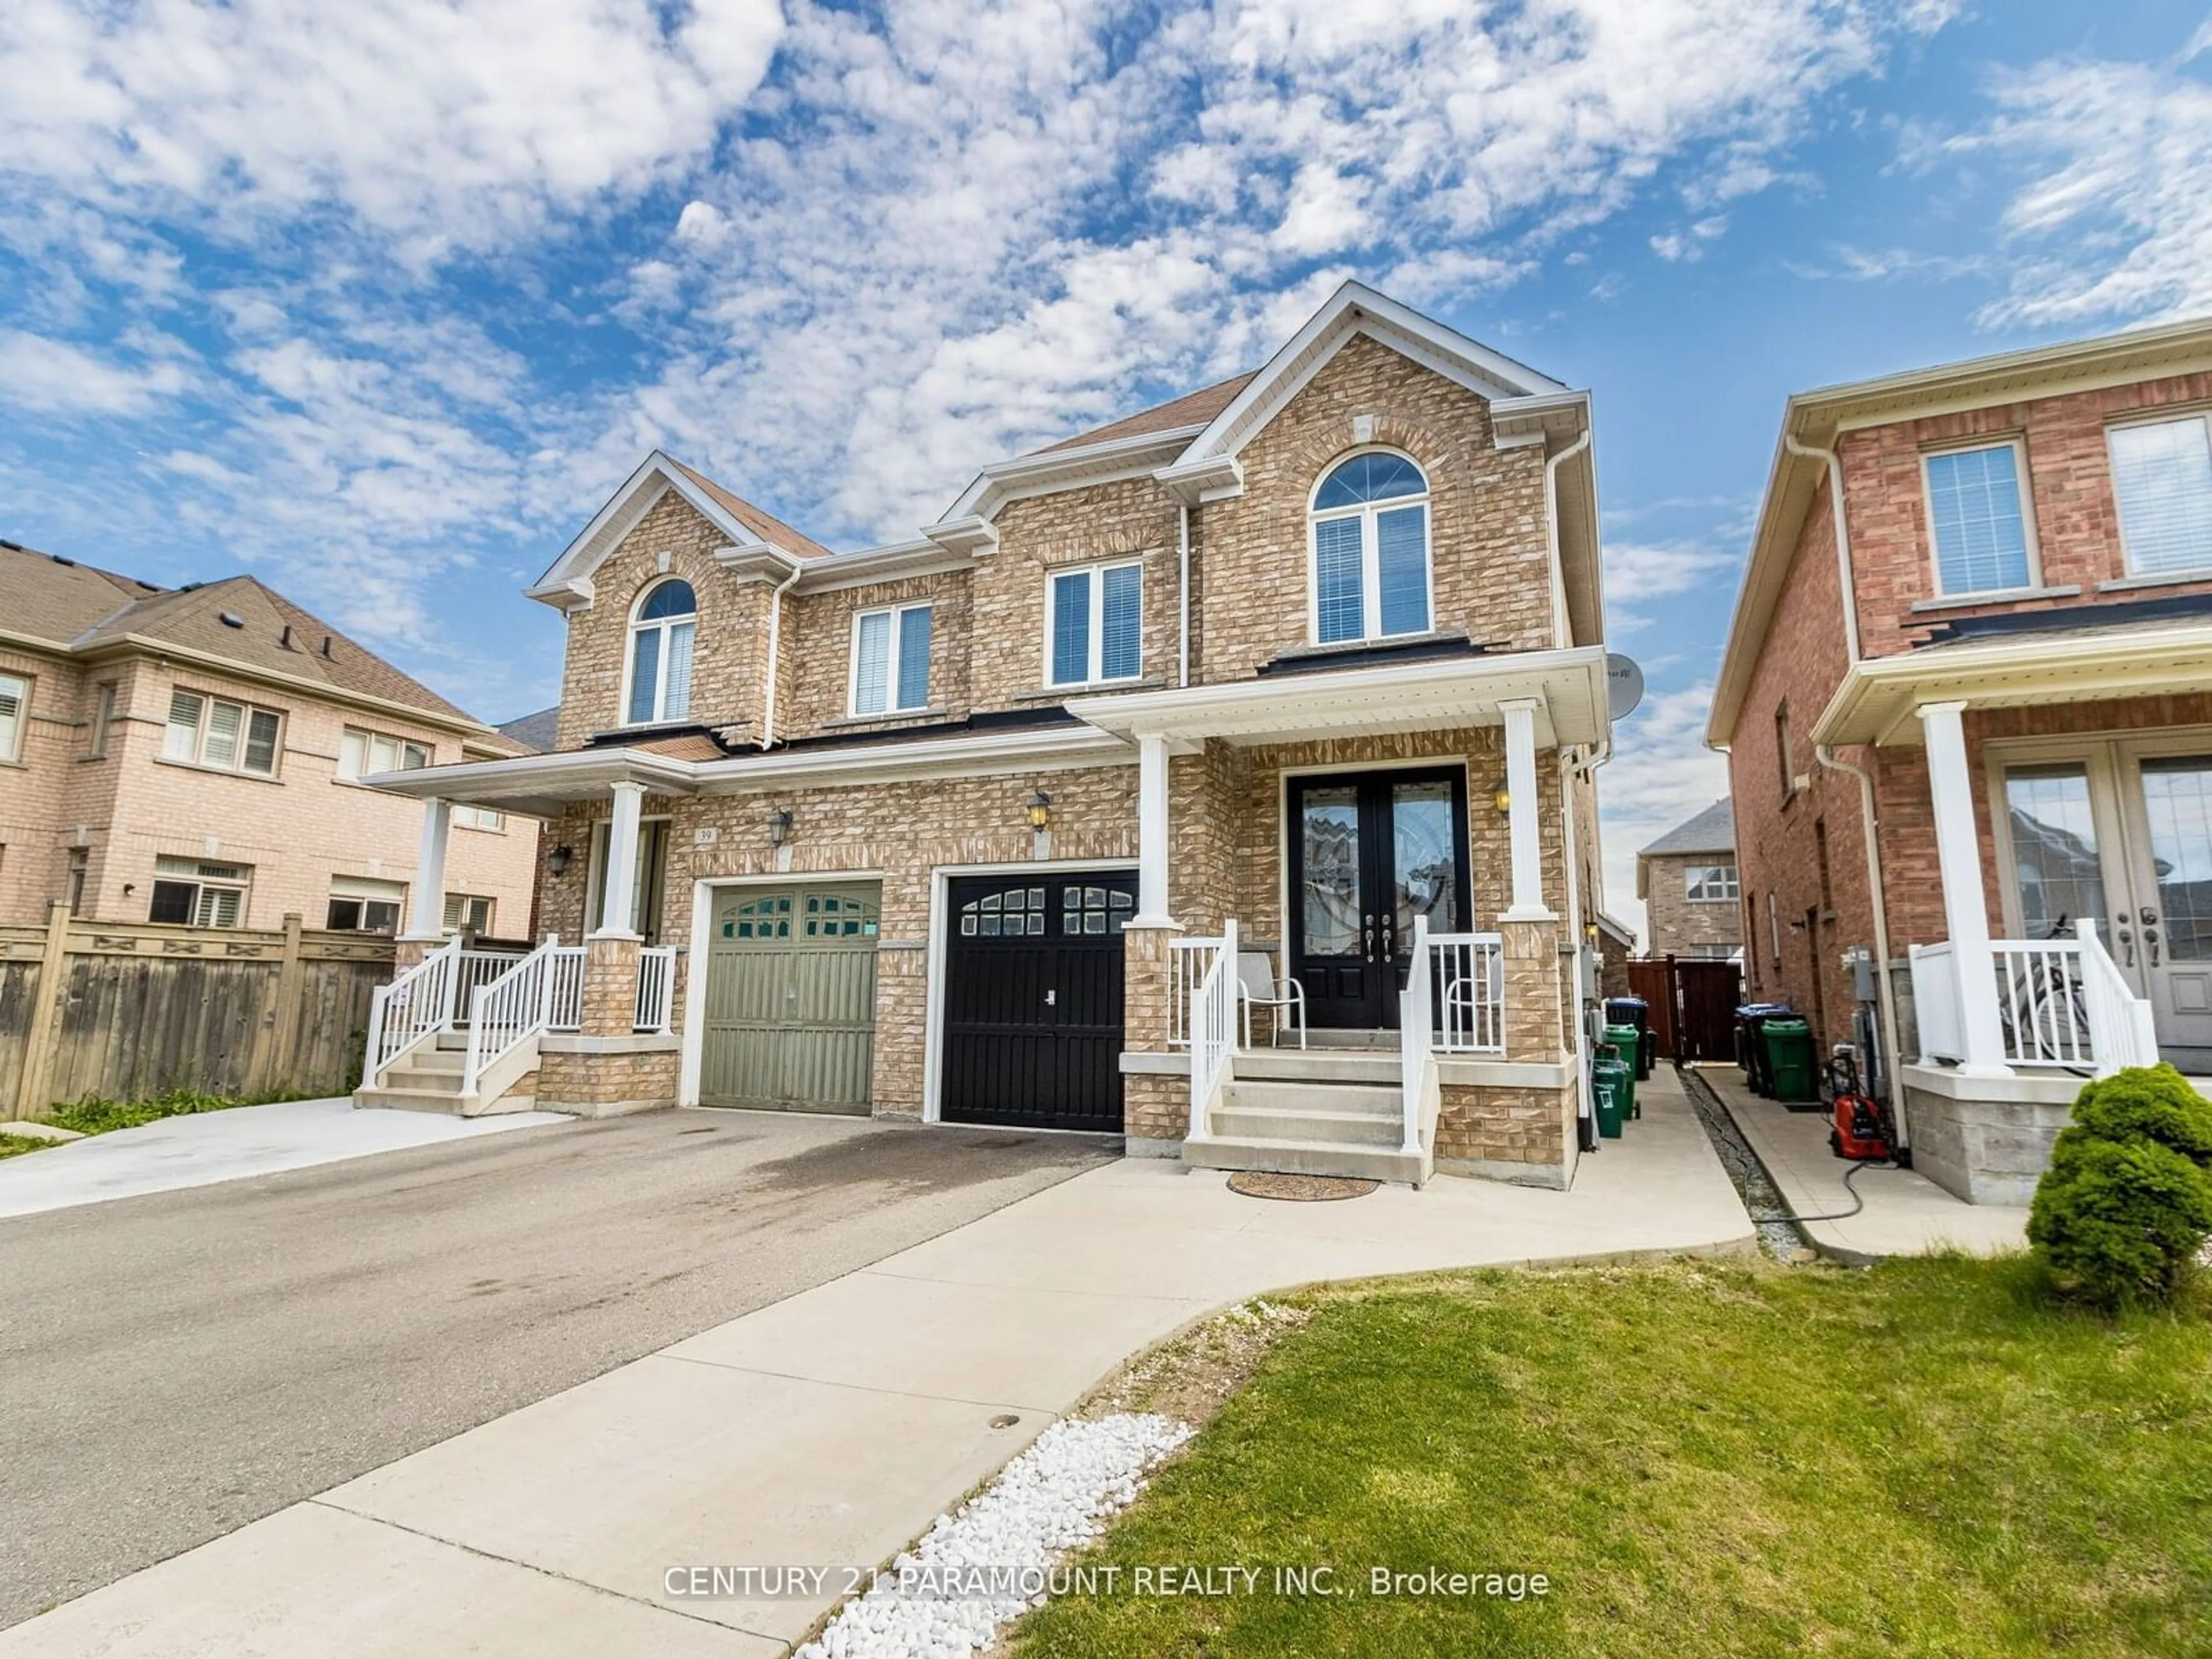 Home with brick exterior material for 37 Campwood Cres, Brampton Ontario L6P 3S6